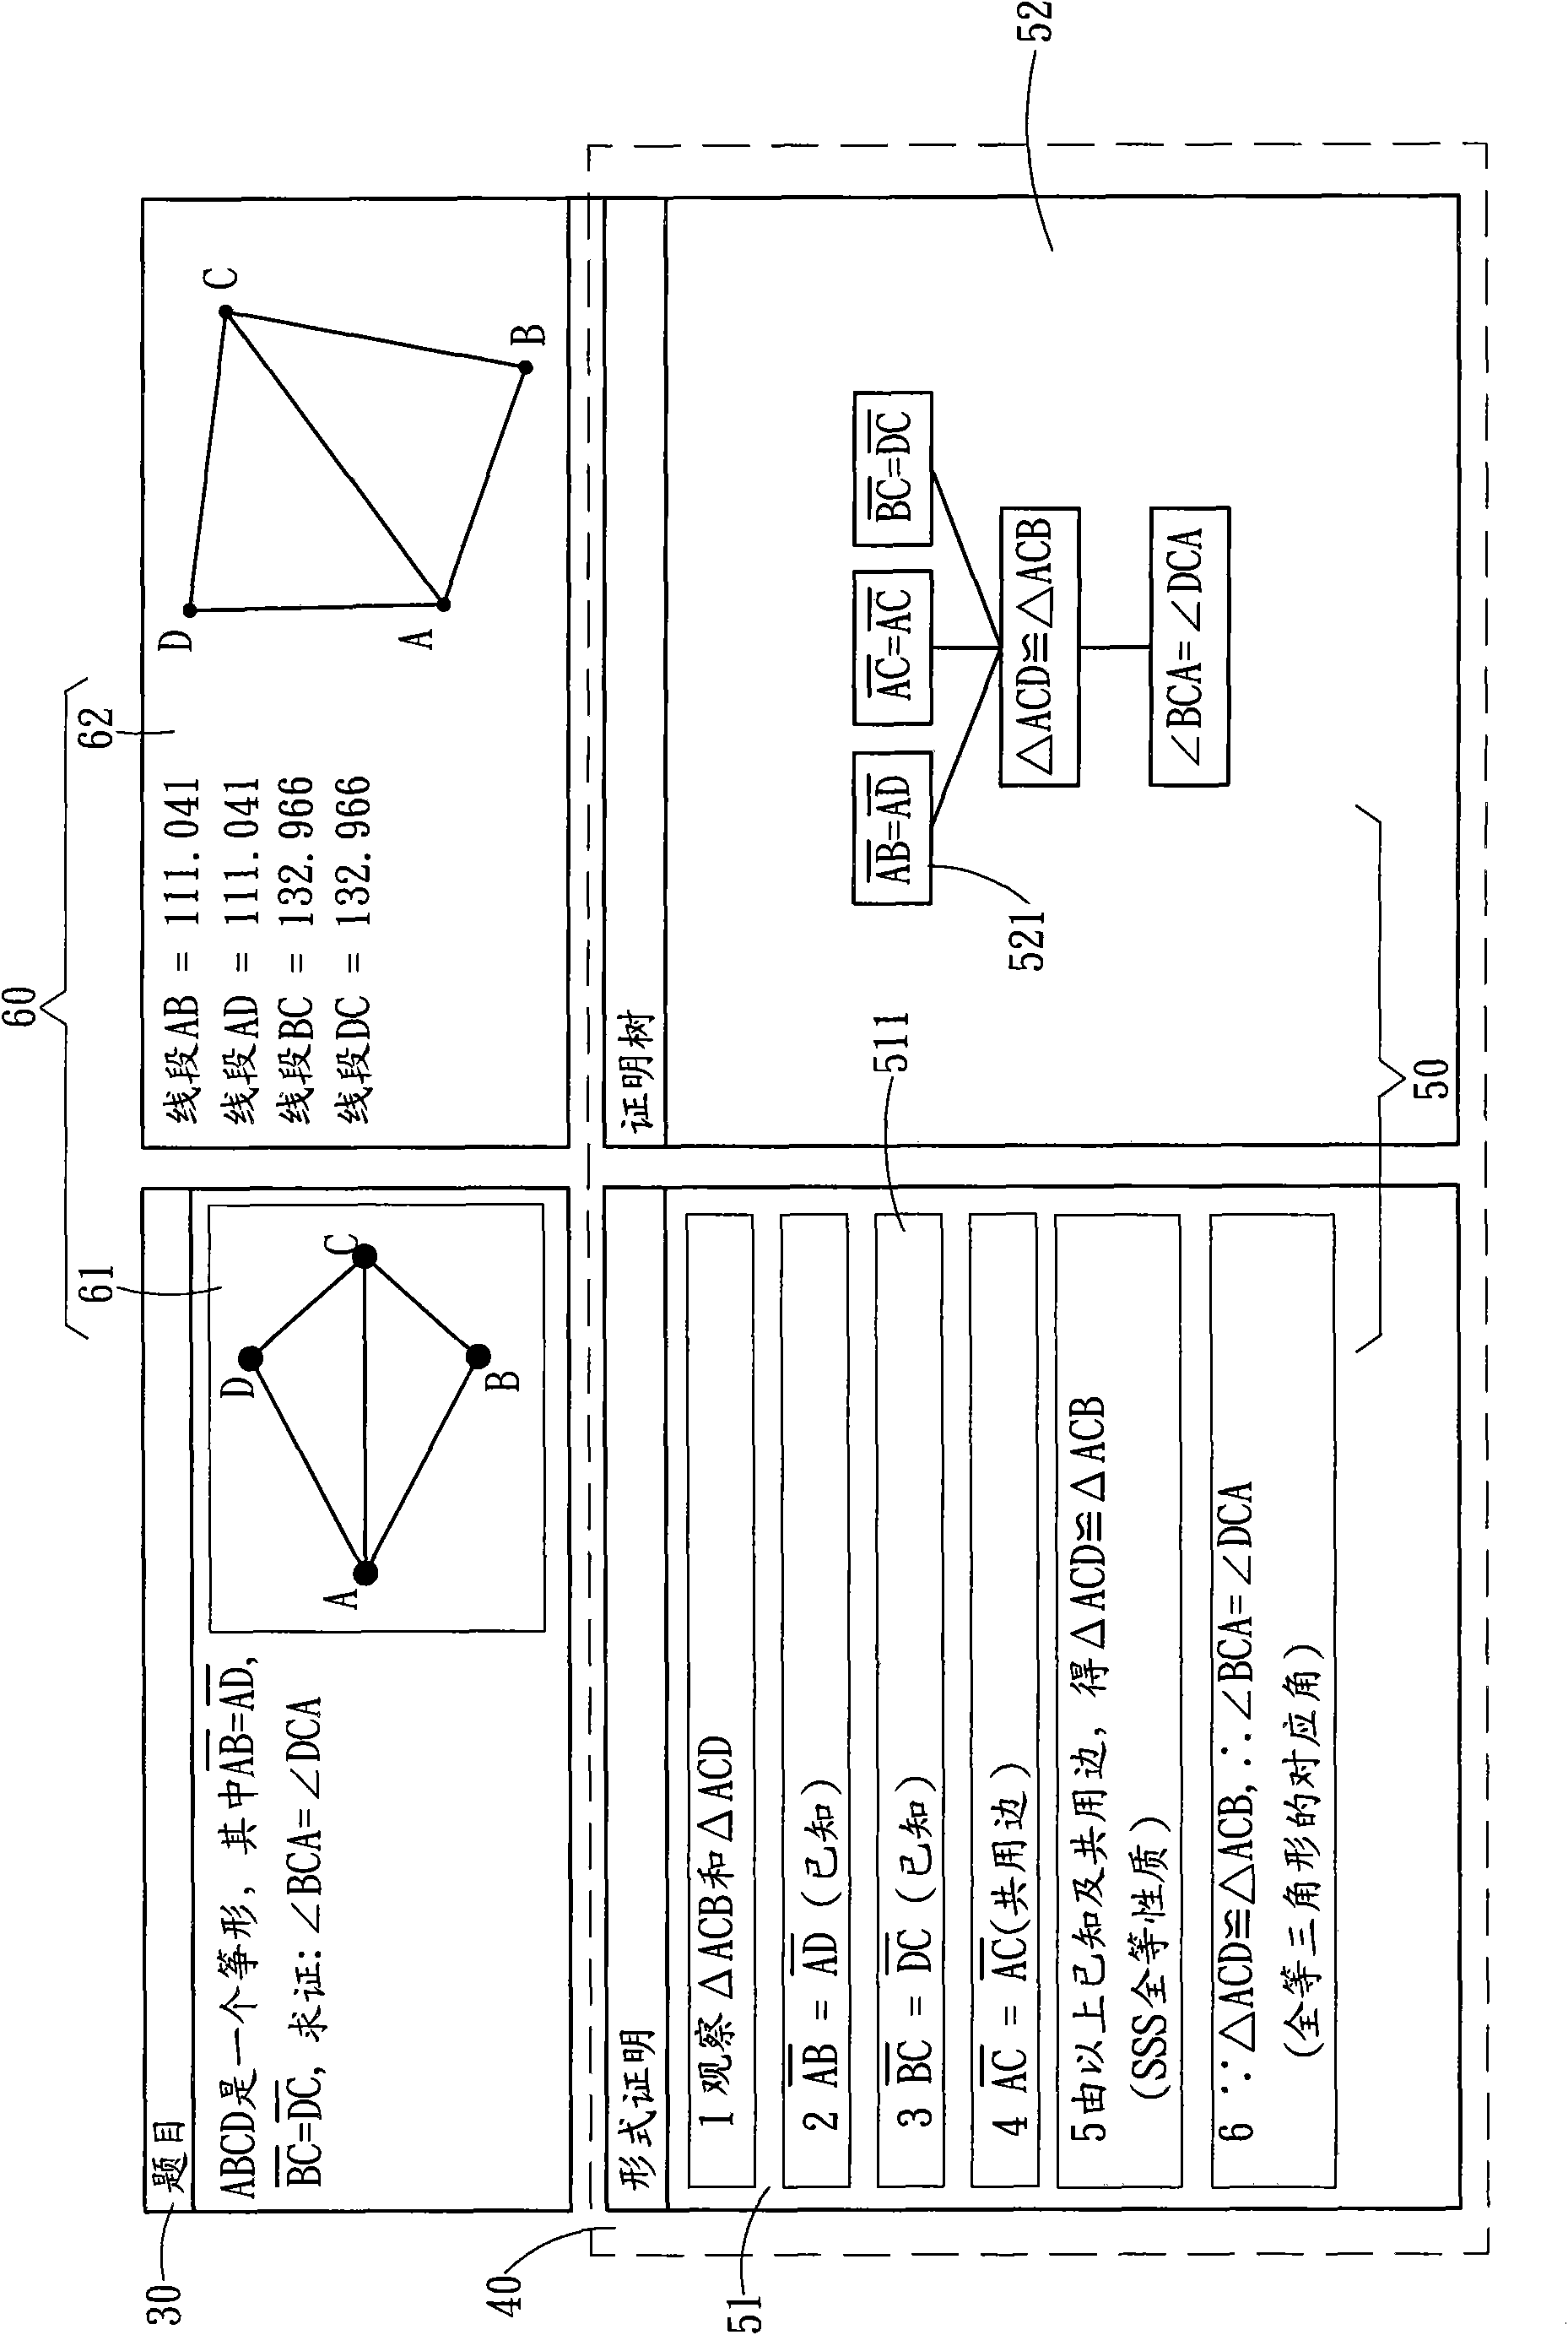 Interactive digital learning system and method for multiple-representation assisted geometric proof